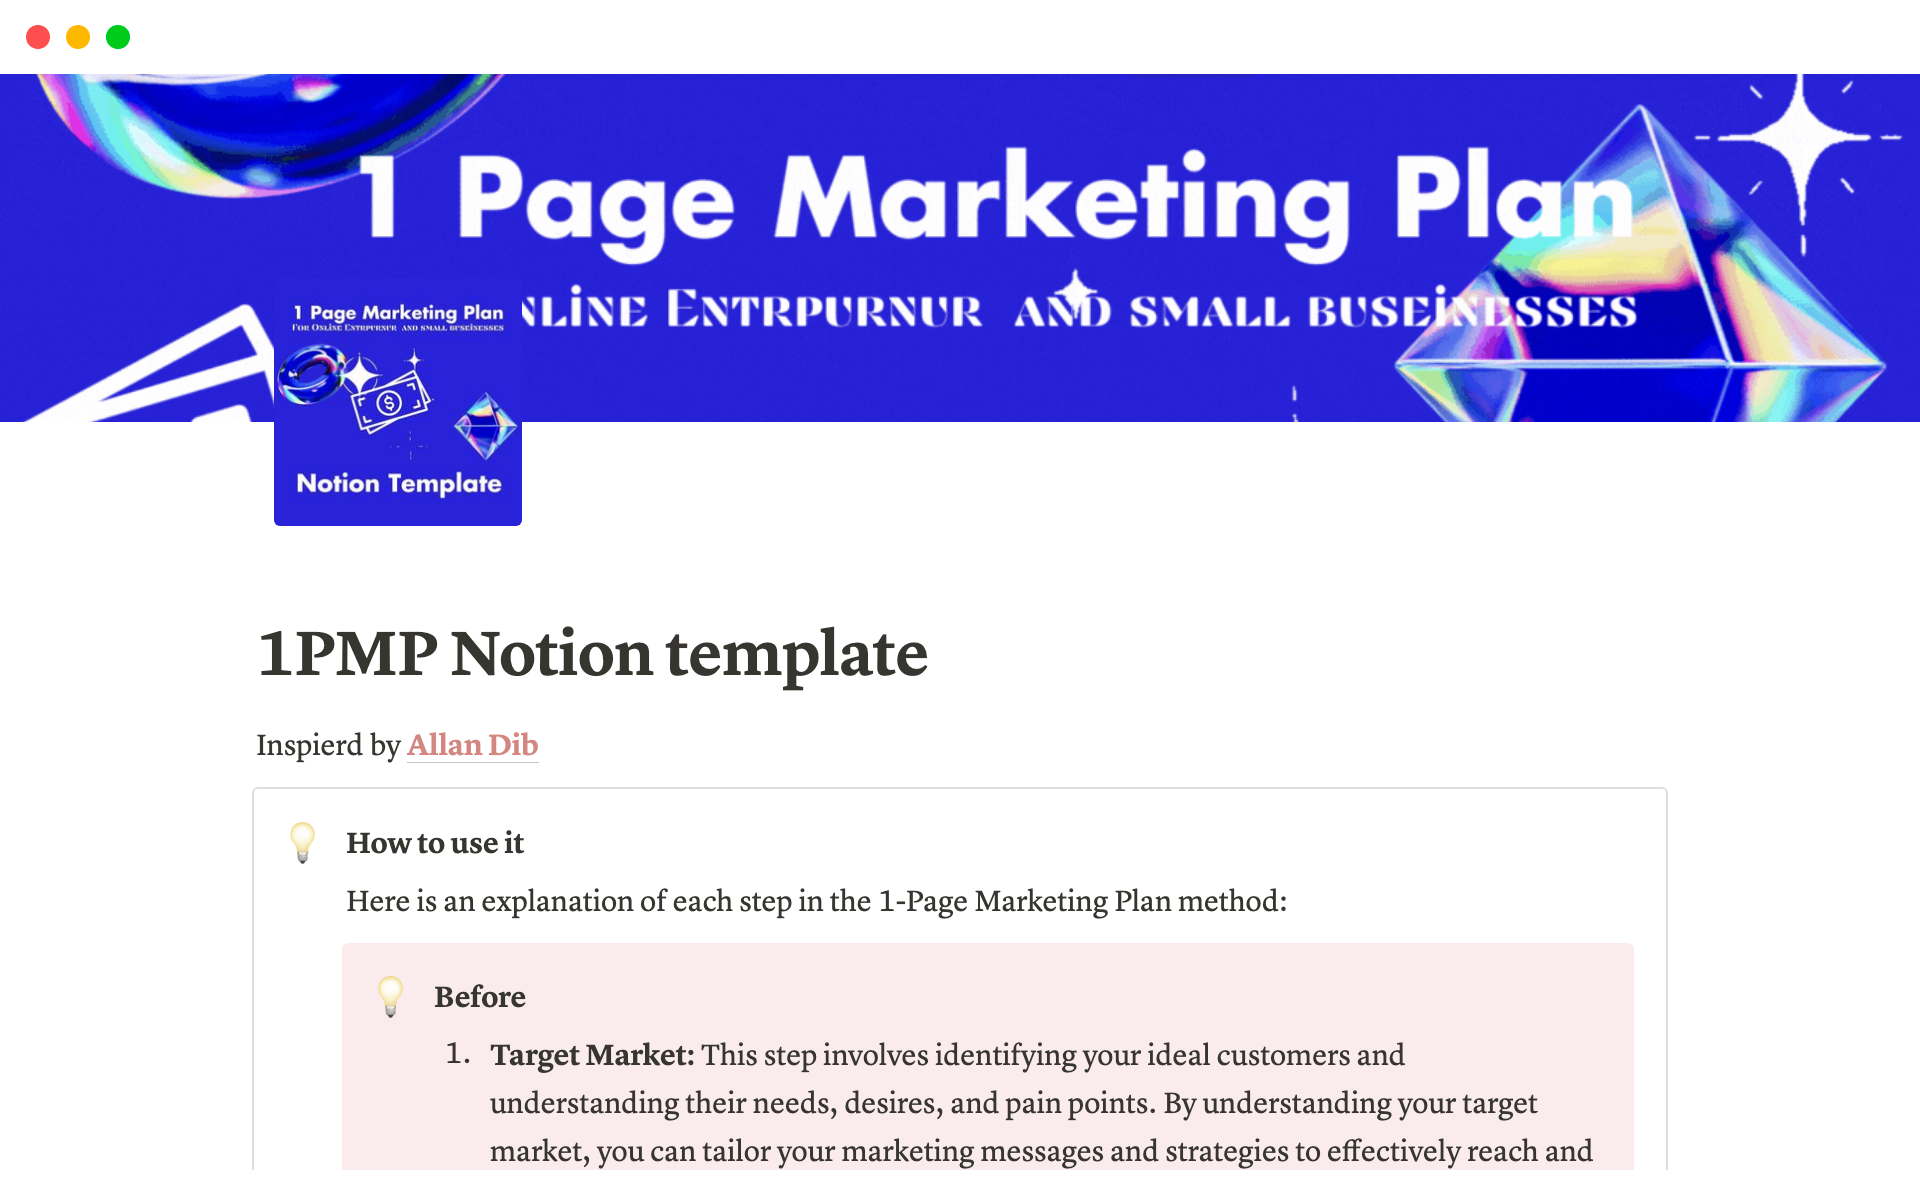 MarketBoost: The Ultimate 1-Page Marketing Plan Notion Template for Small Online Businesses님의 템플릿 미리보기